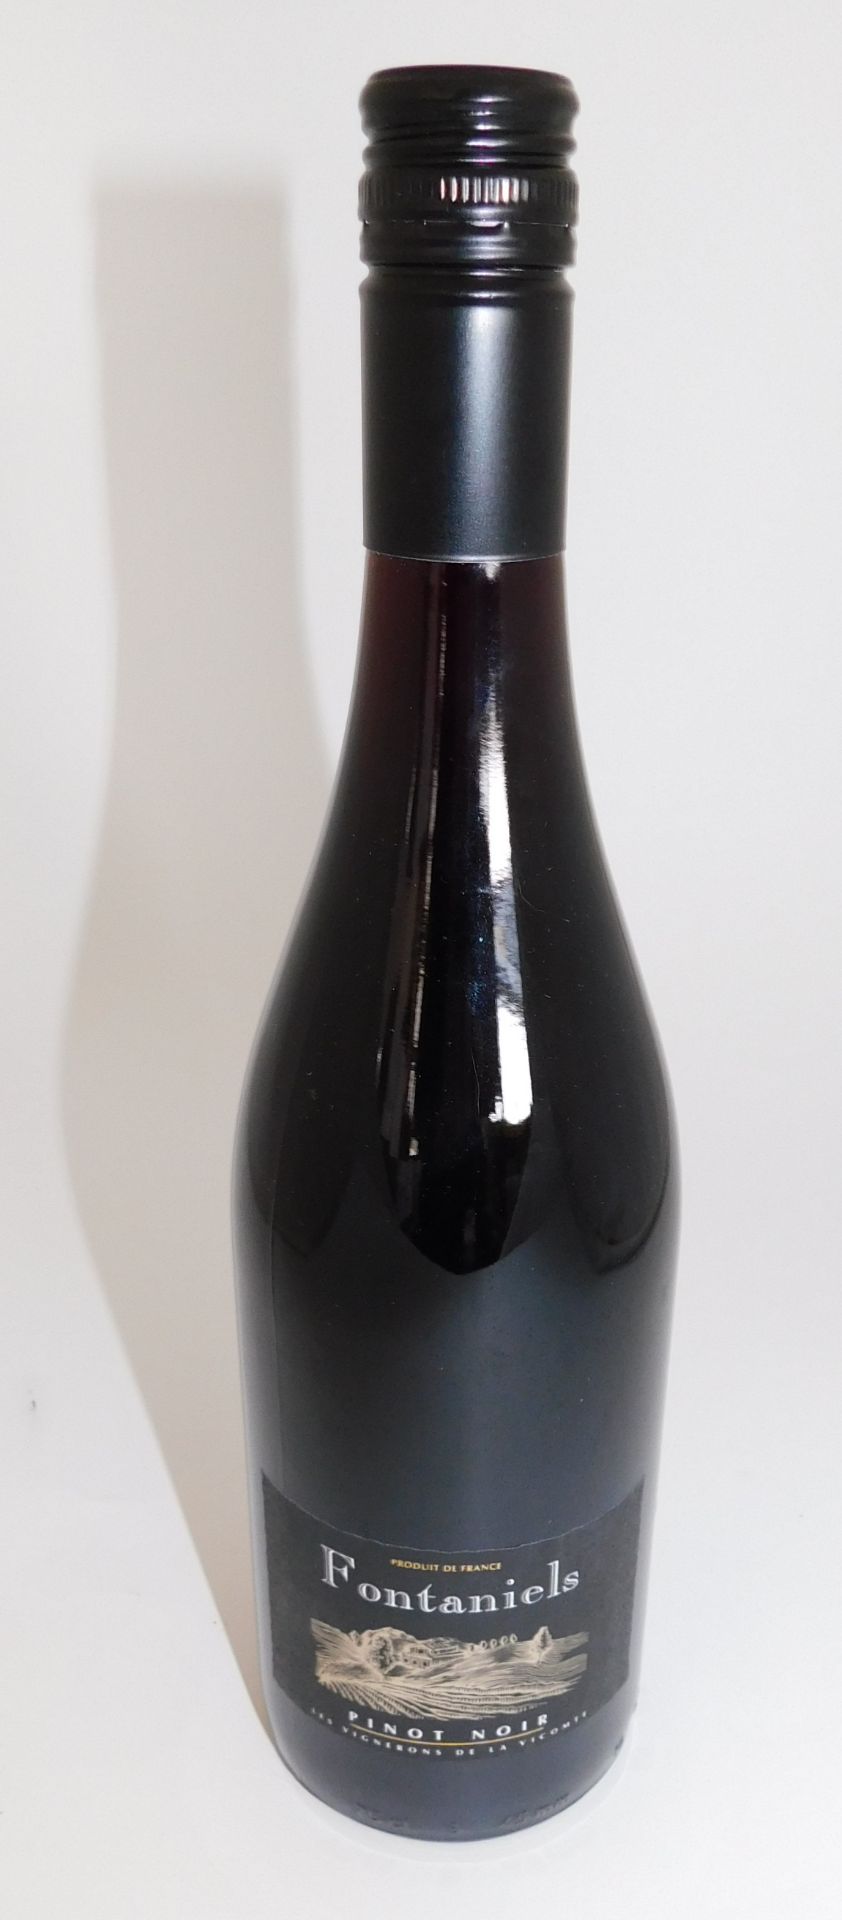 18 Bottles of Fontaniels Pinot Noir, 750ml (Located Stockport – See General Notes for More Details)